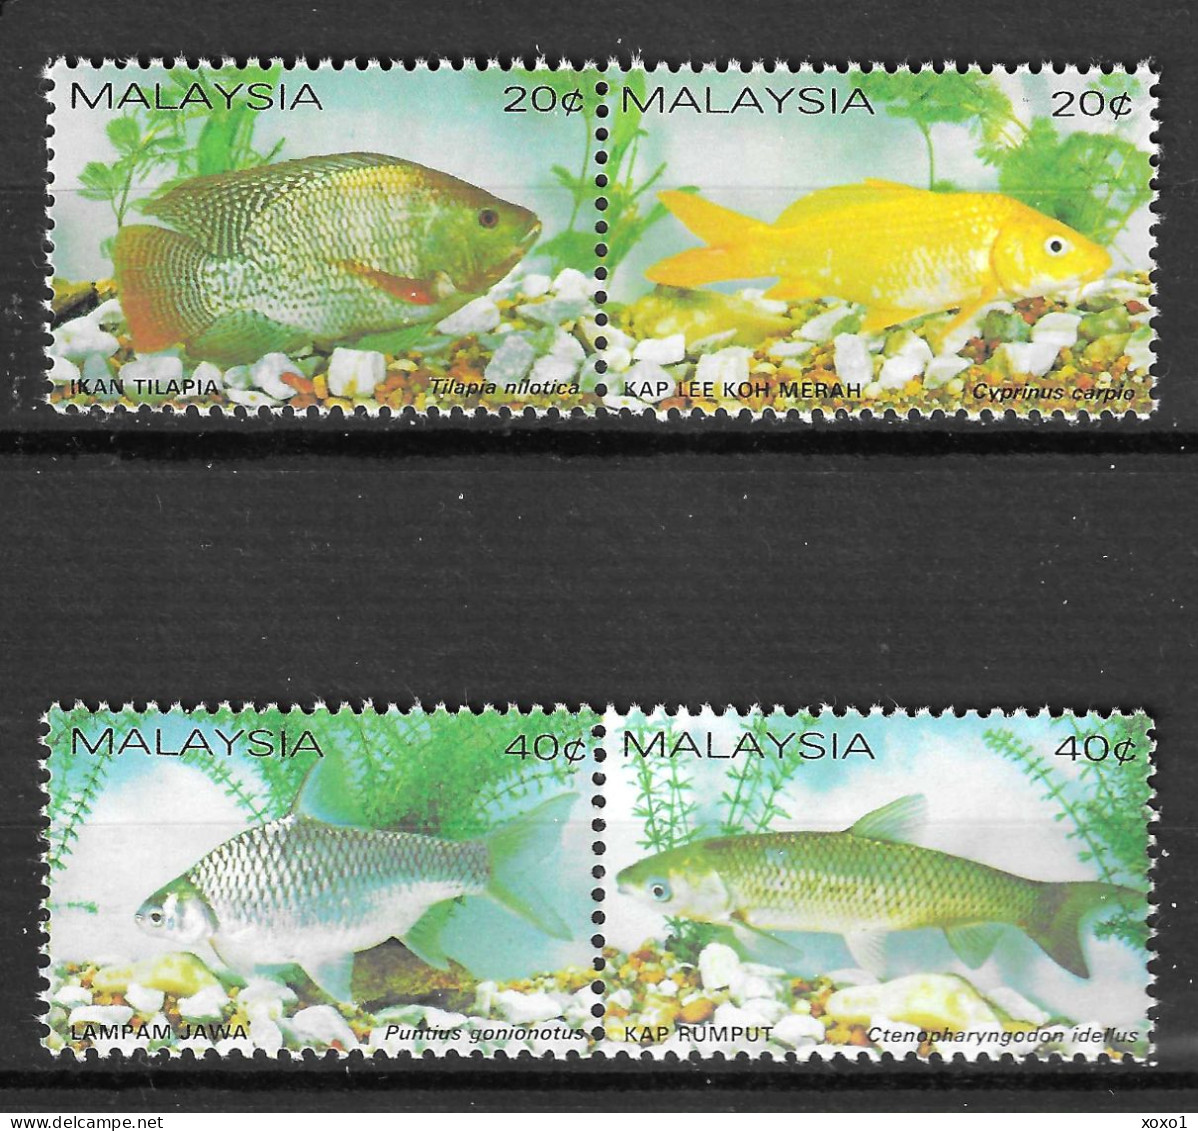 Malaysia 1983 MiNr. 258 - 261 Marine Life Fishes 4v   MNH** 12.00 € - Fische